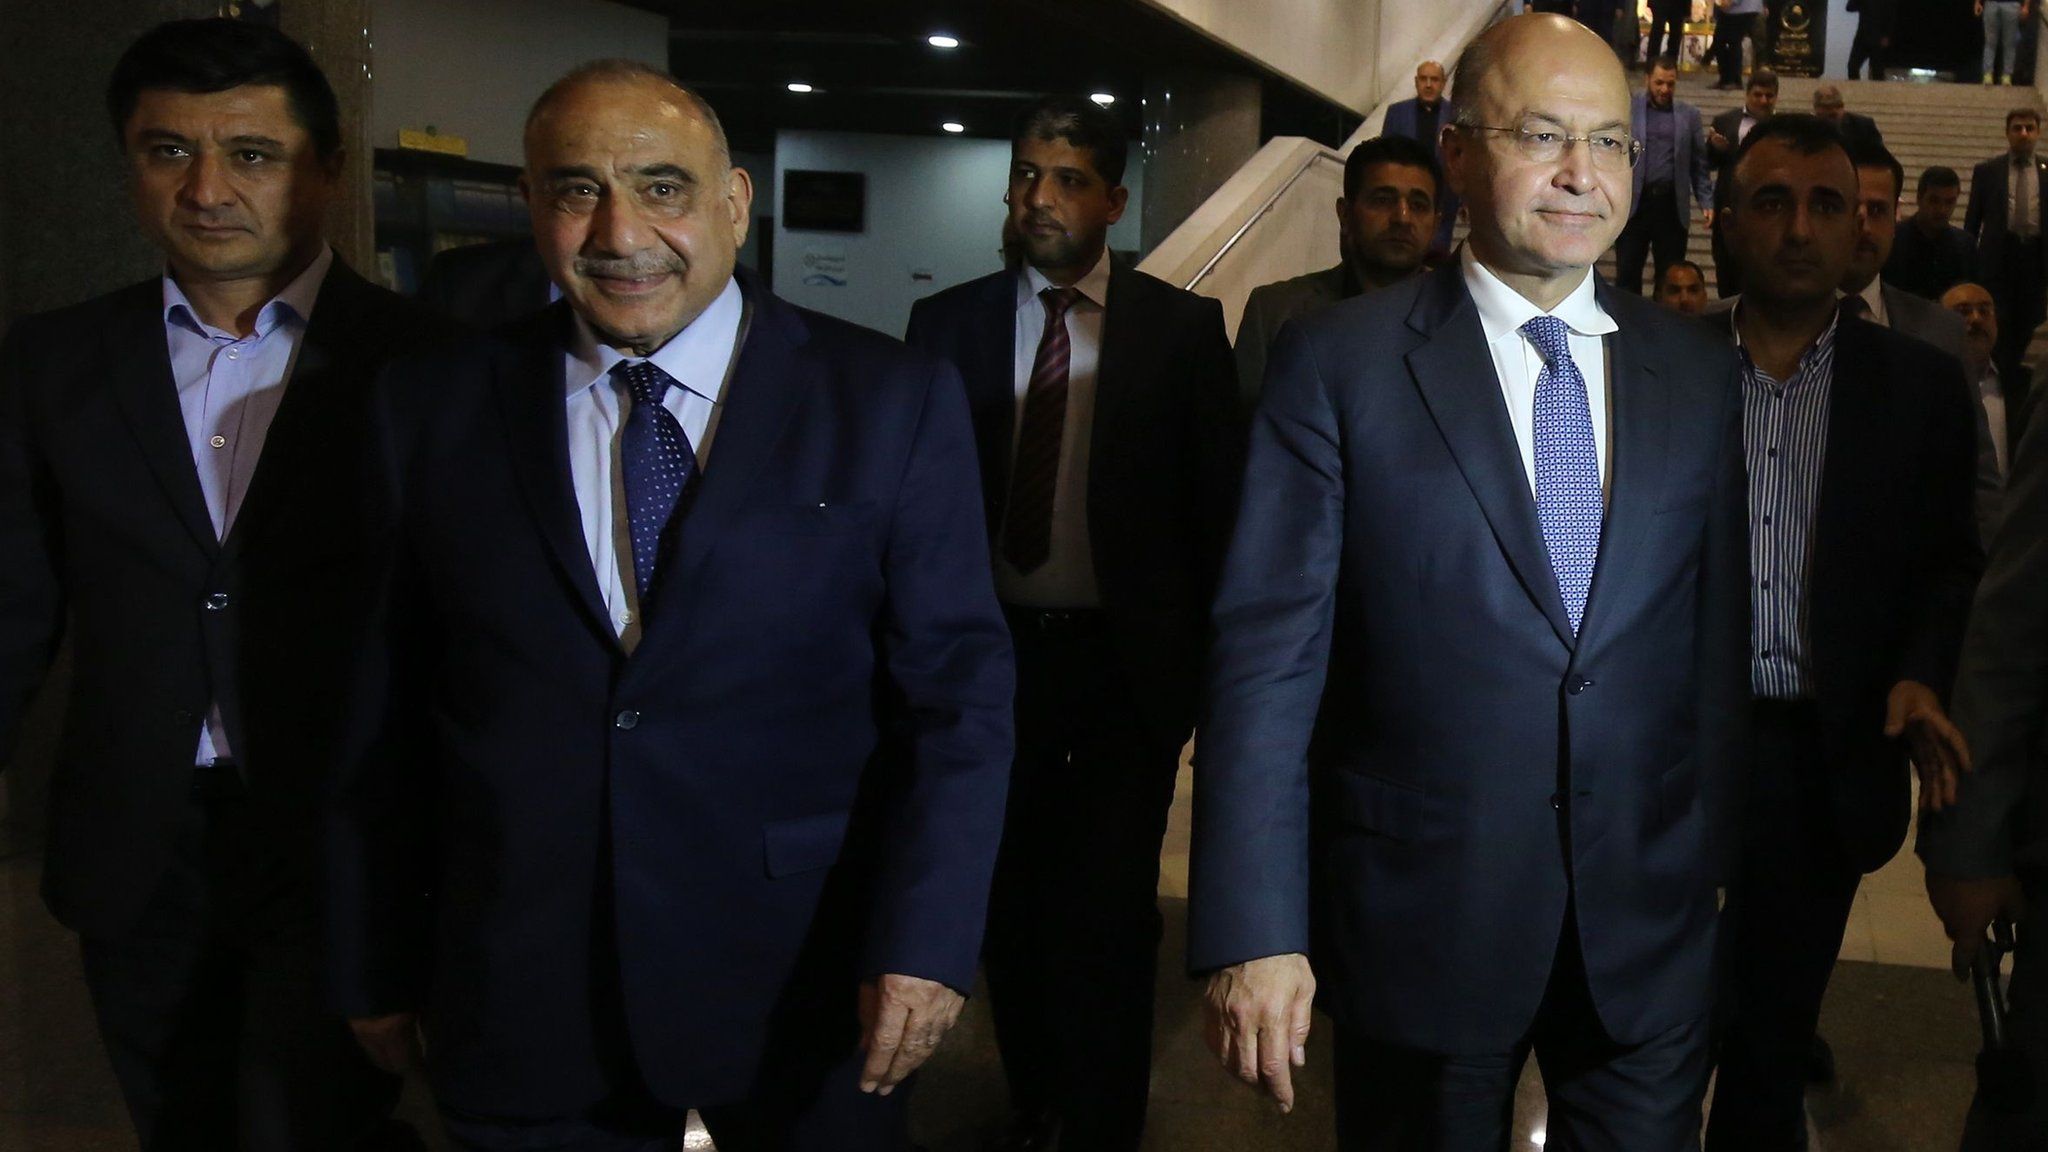 Iraq's Prime Minister-designate Adel Abdul Mahdi (2nd Left) and Barham Saleh (2nd Right) walk out of the Iraqi parliament on 2 October 2018